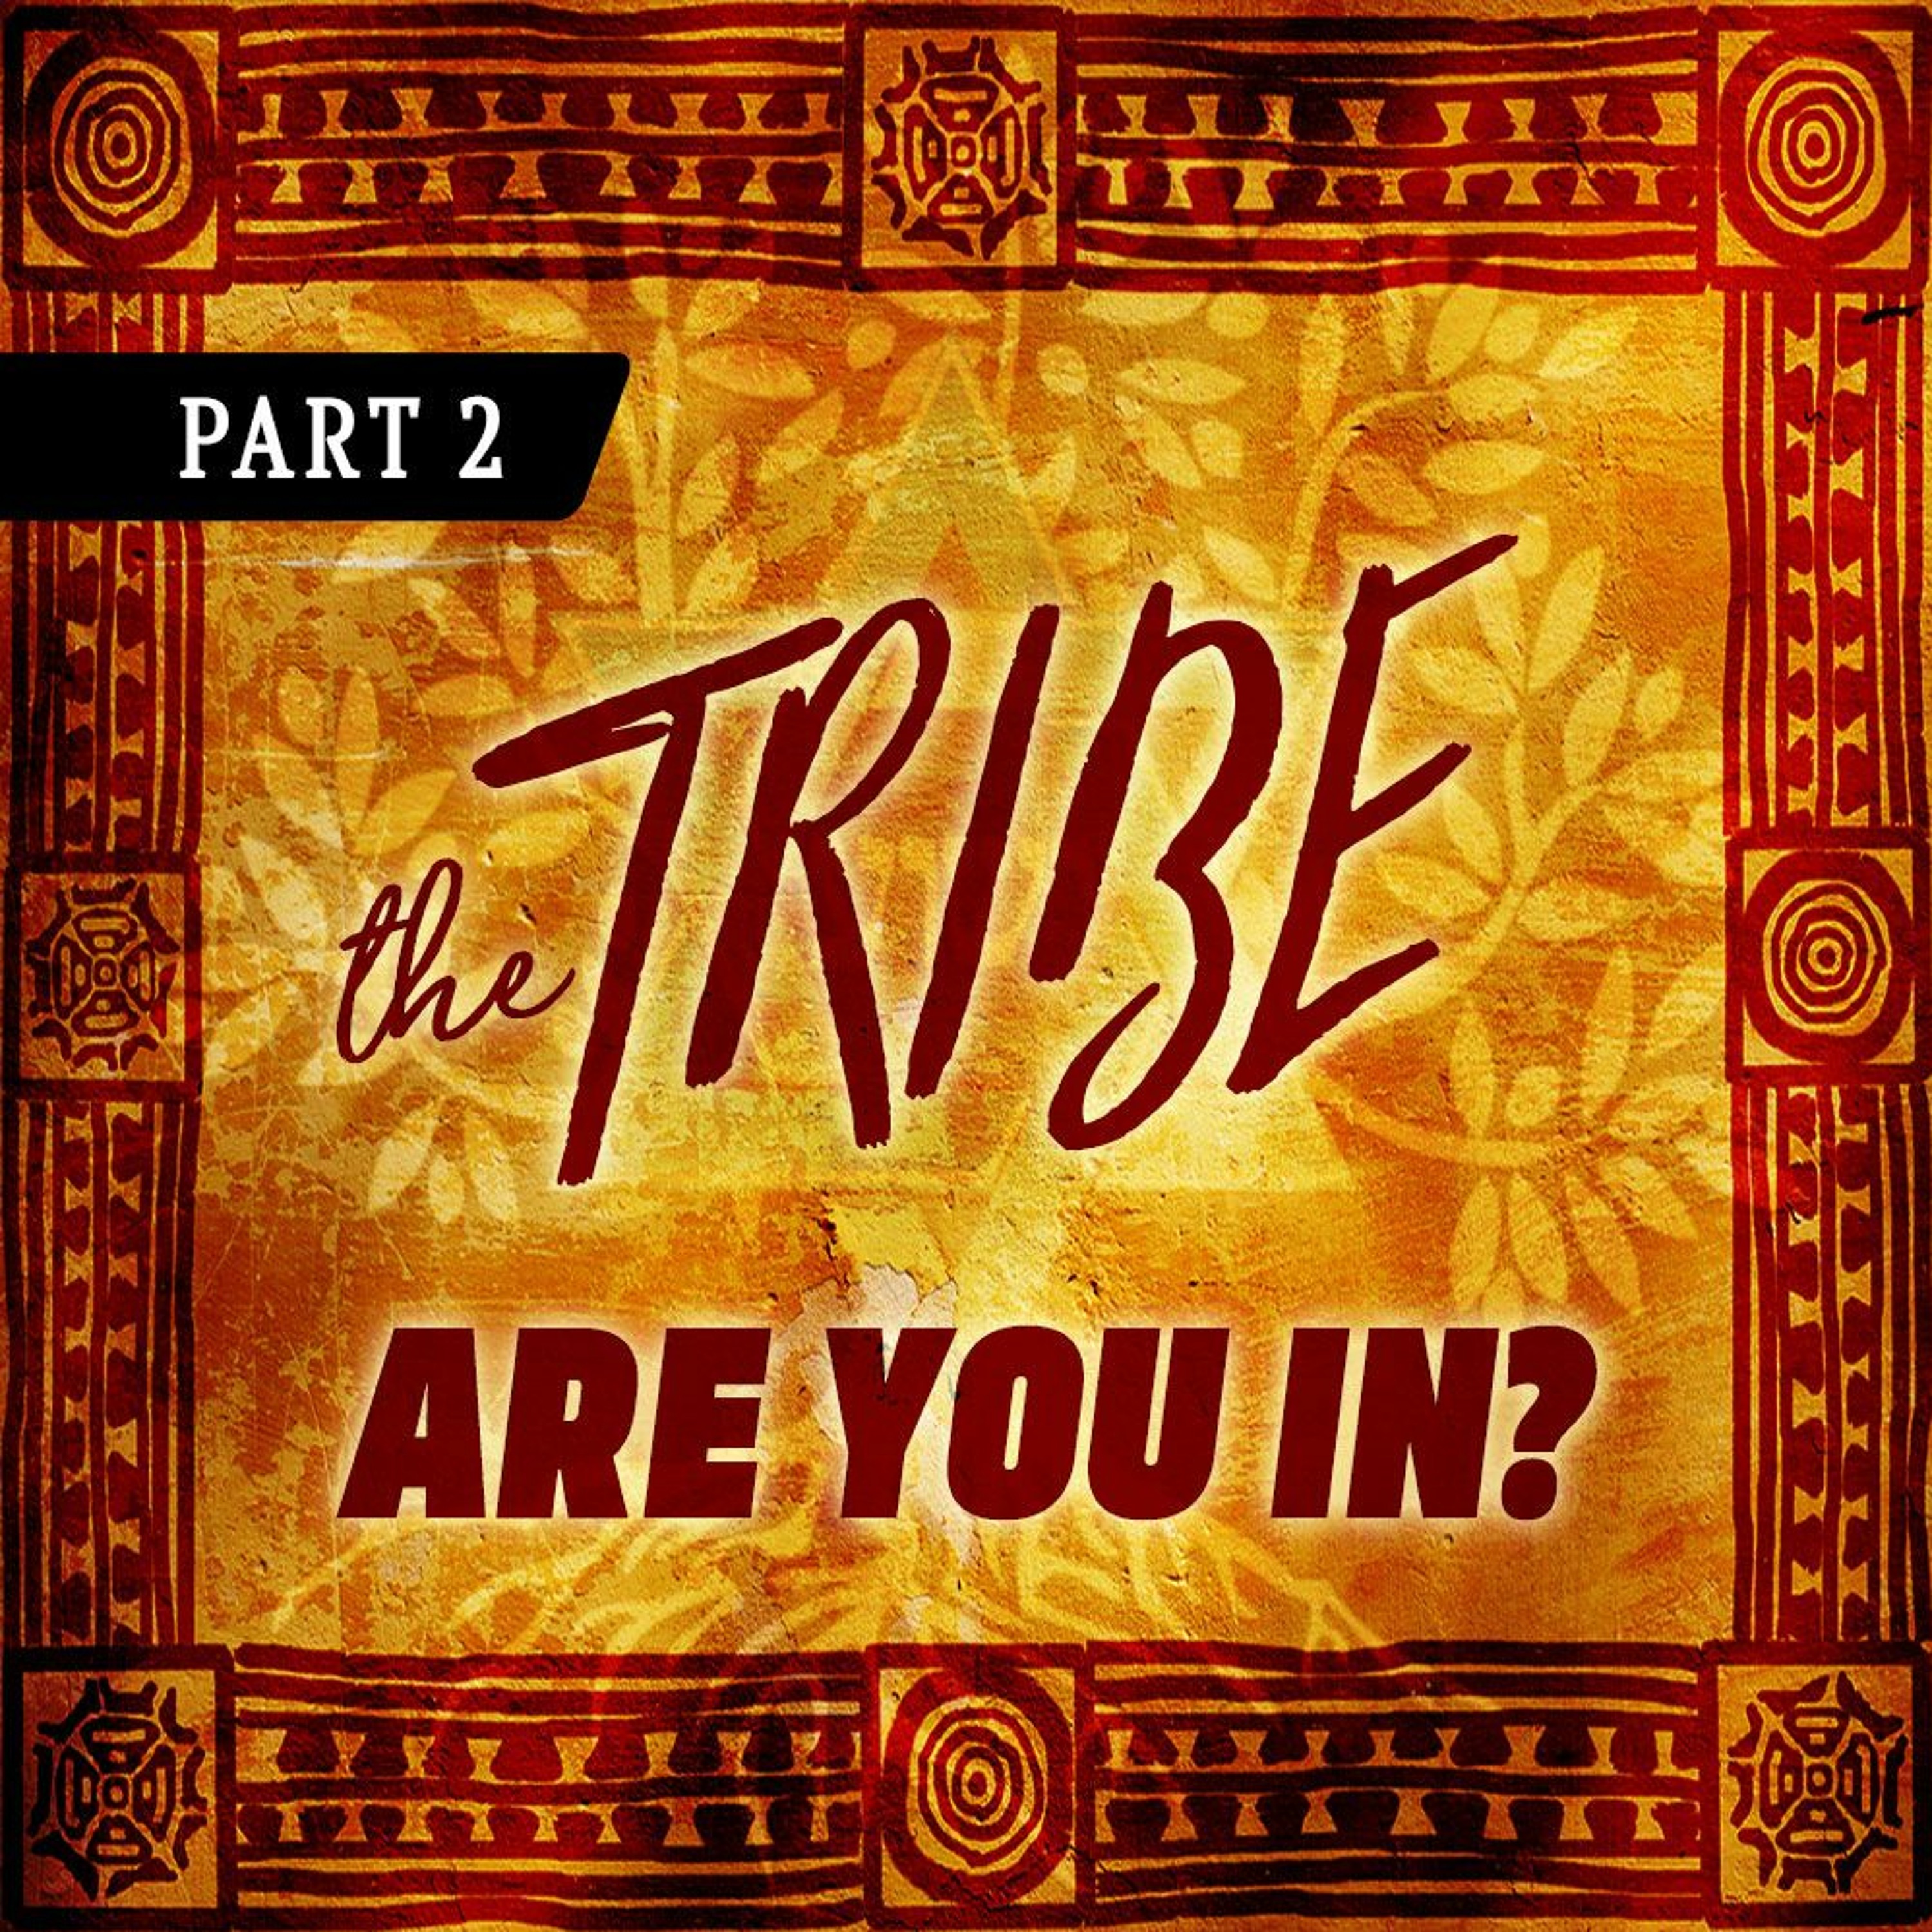 The Tribe - Part 2